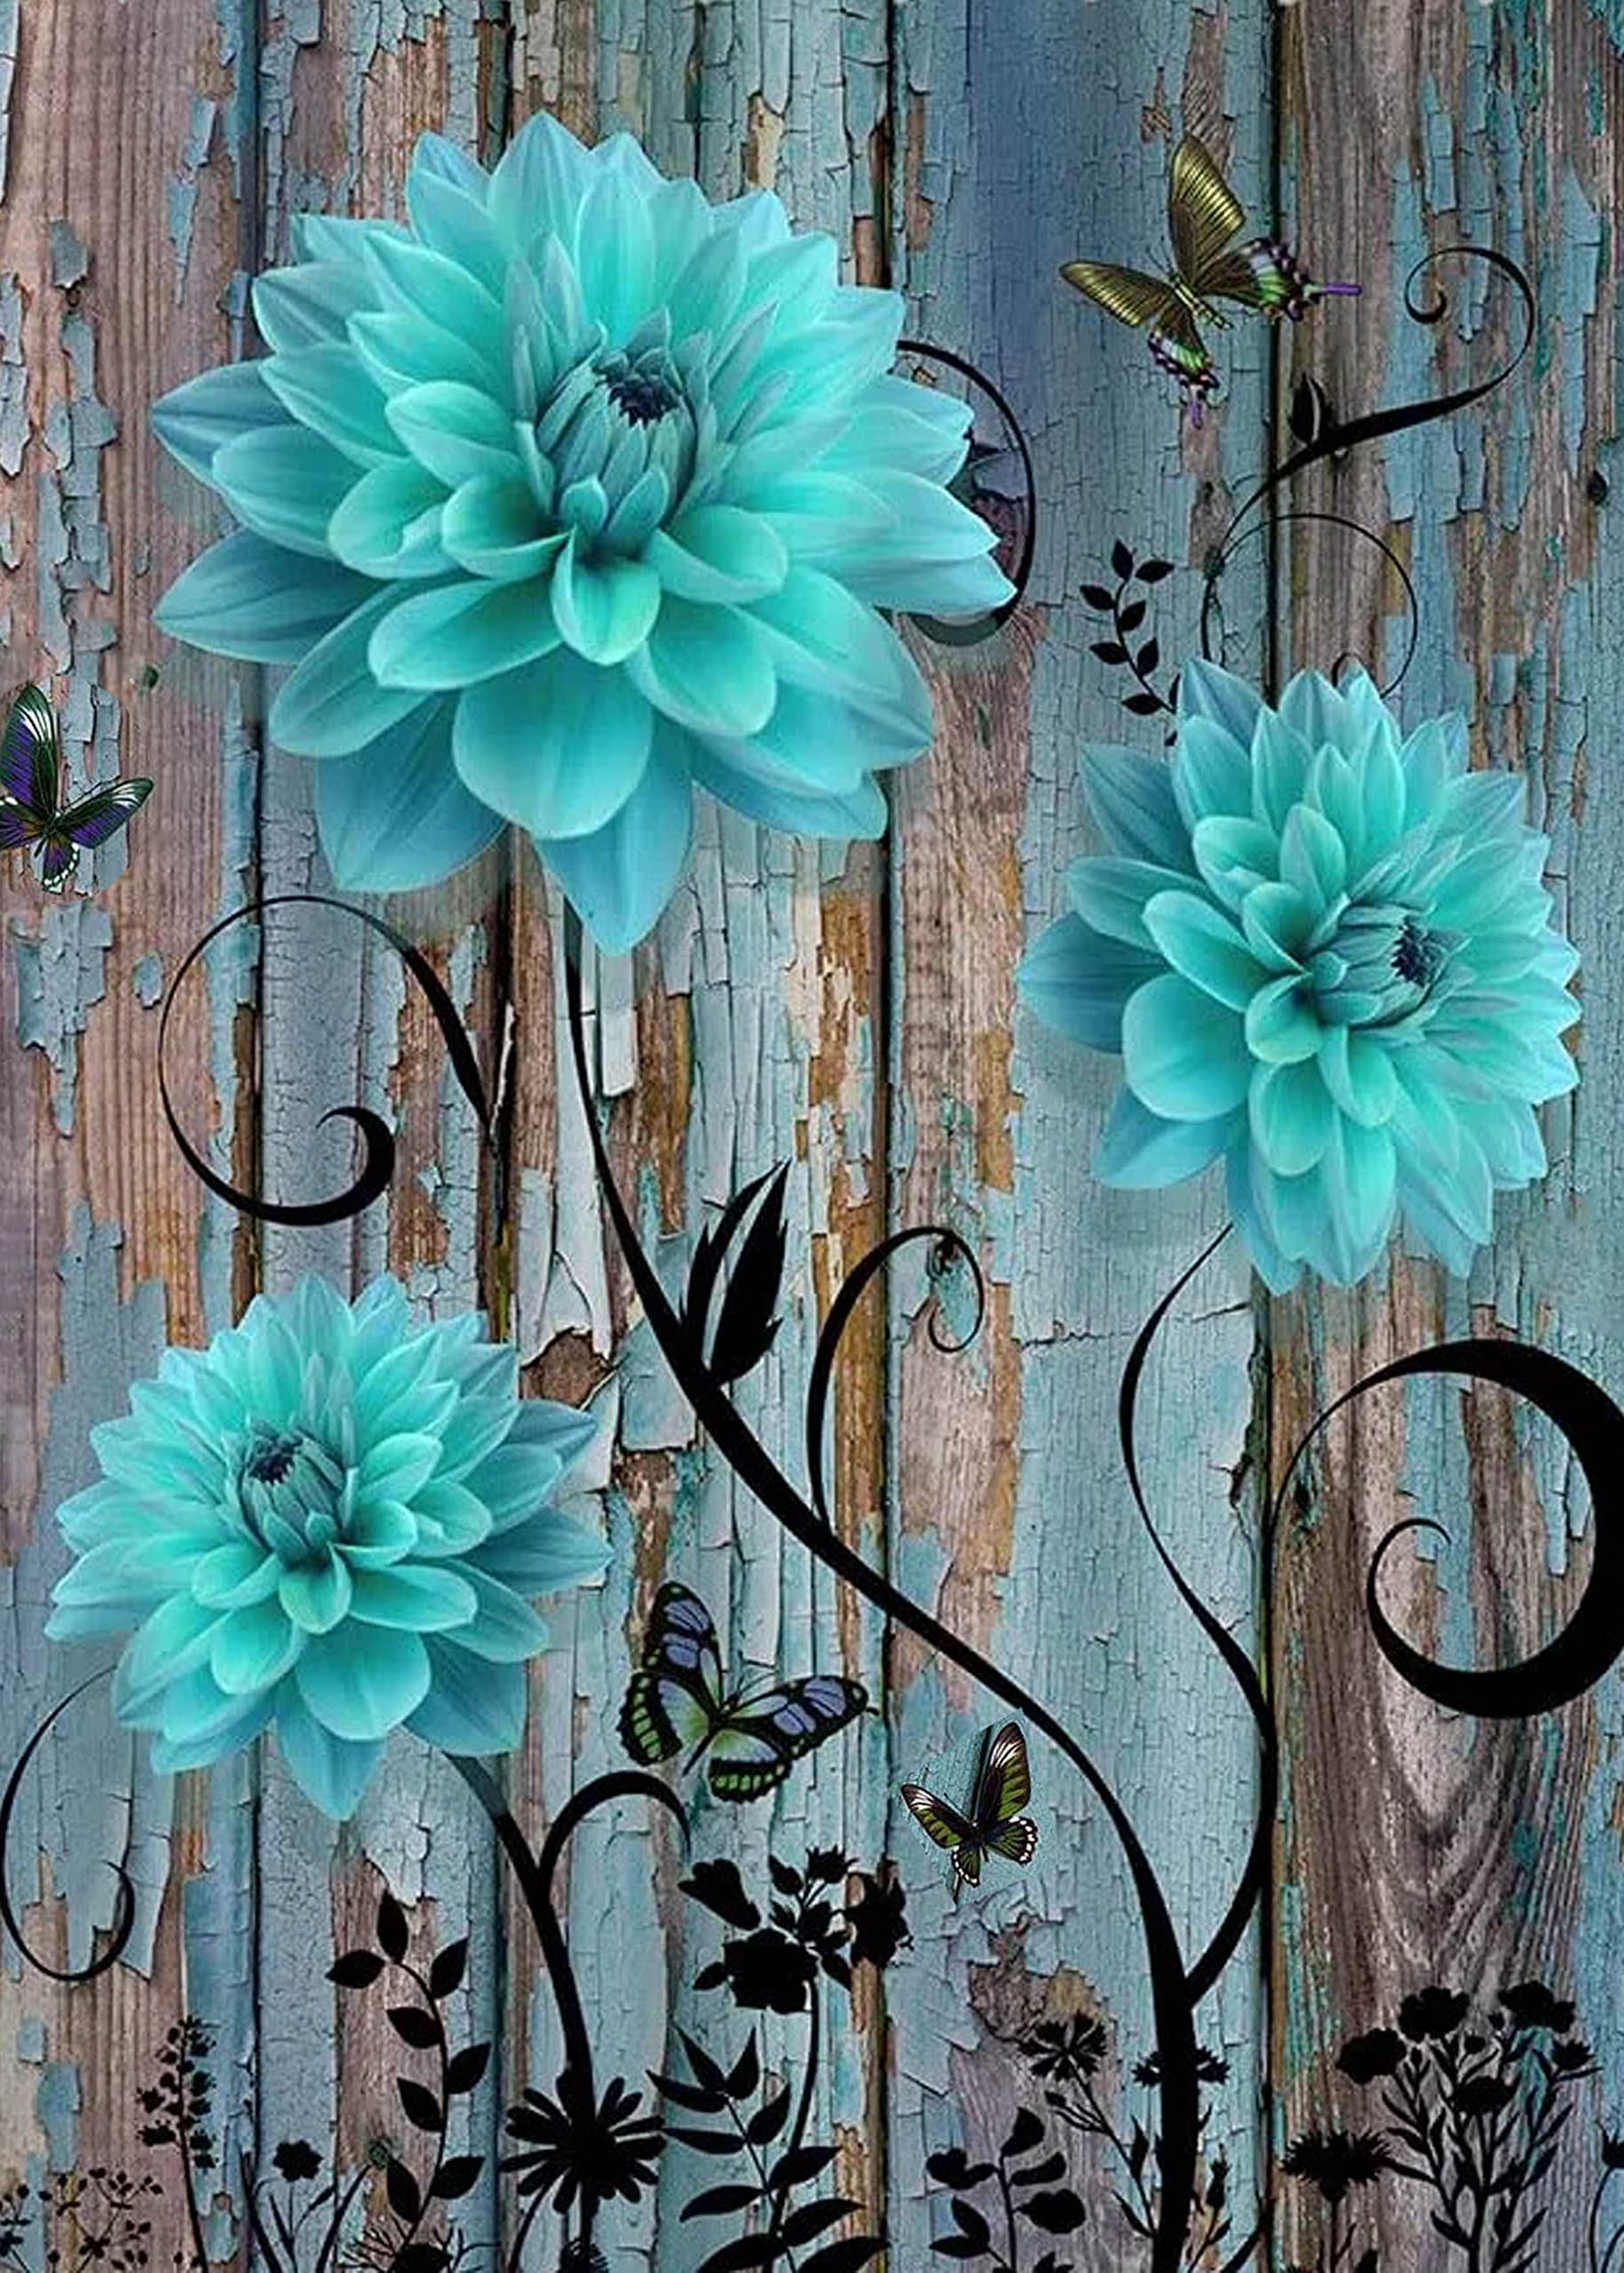 Rustic Flower Diamond Painting Kits for Adults - Farmhouse 5D